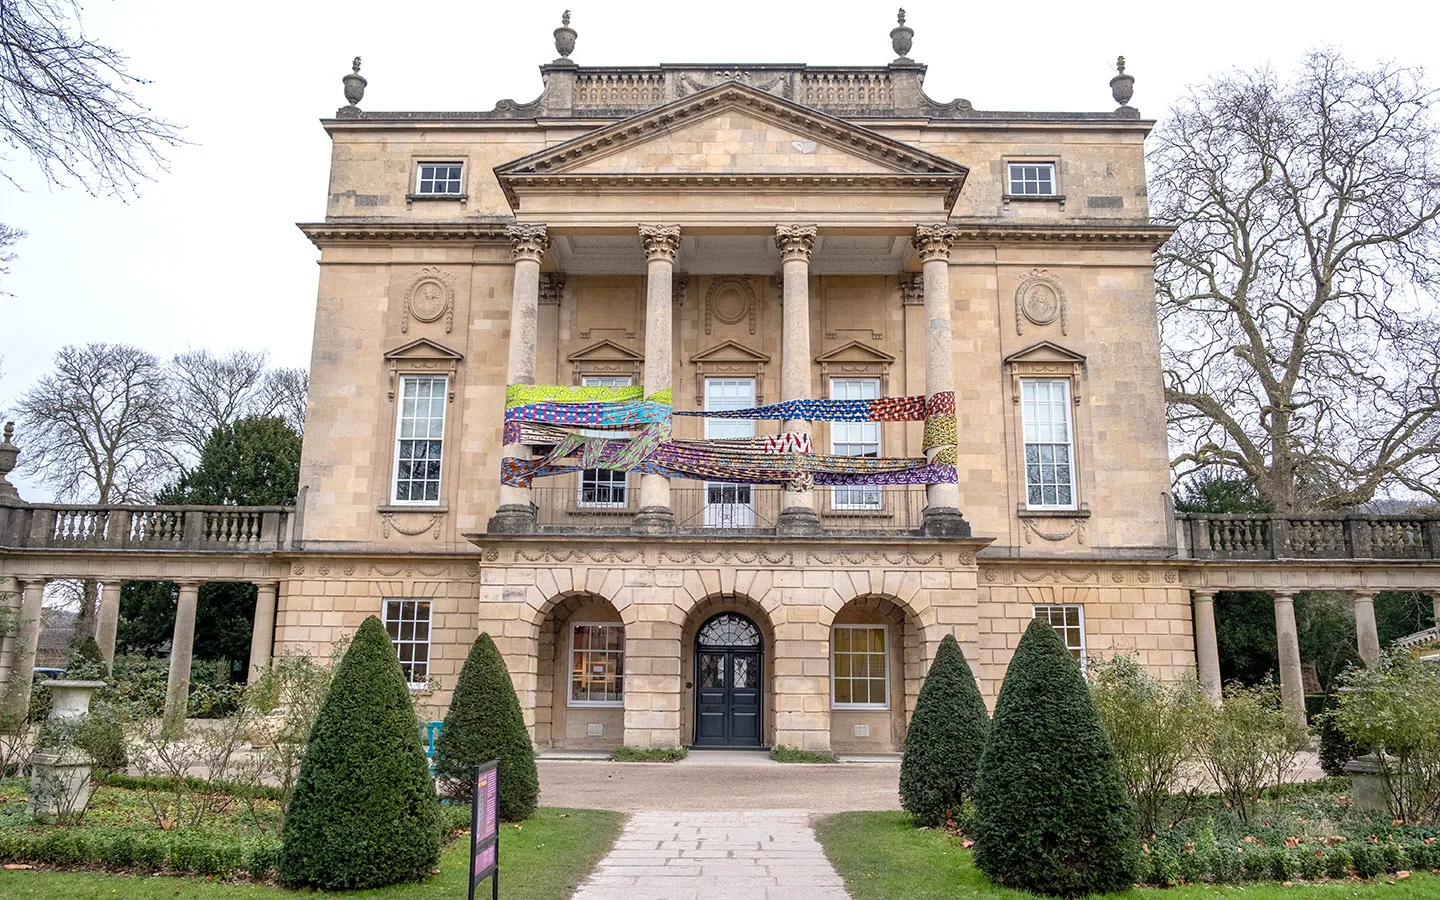 The Holburne Museum in Bath